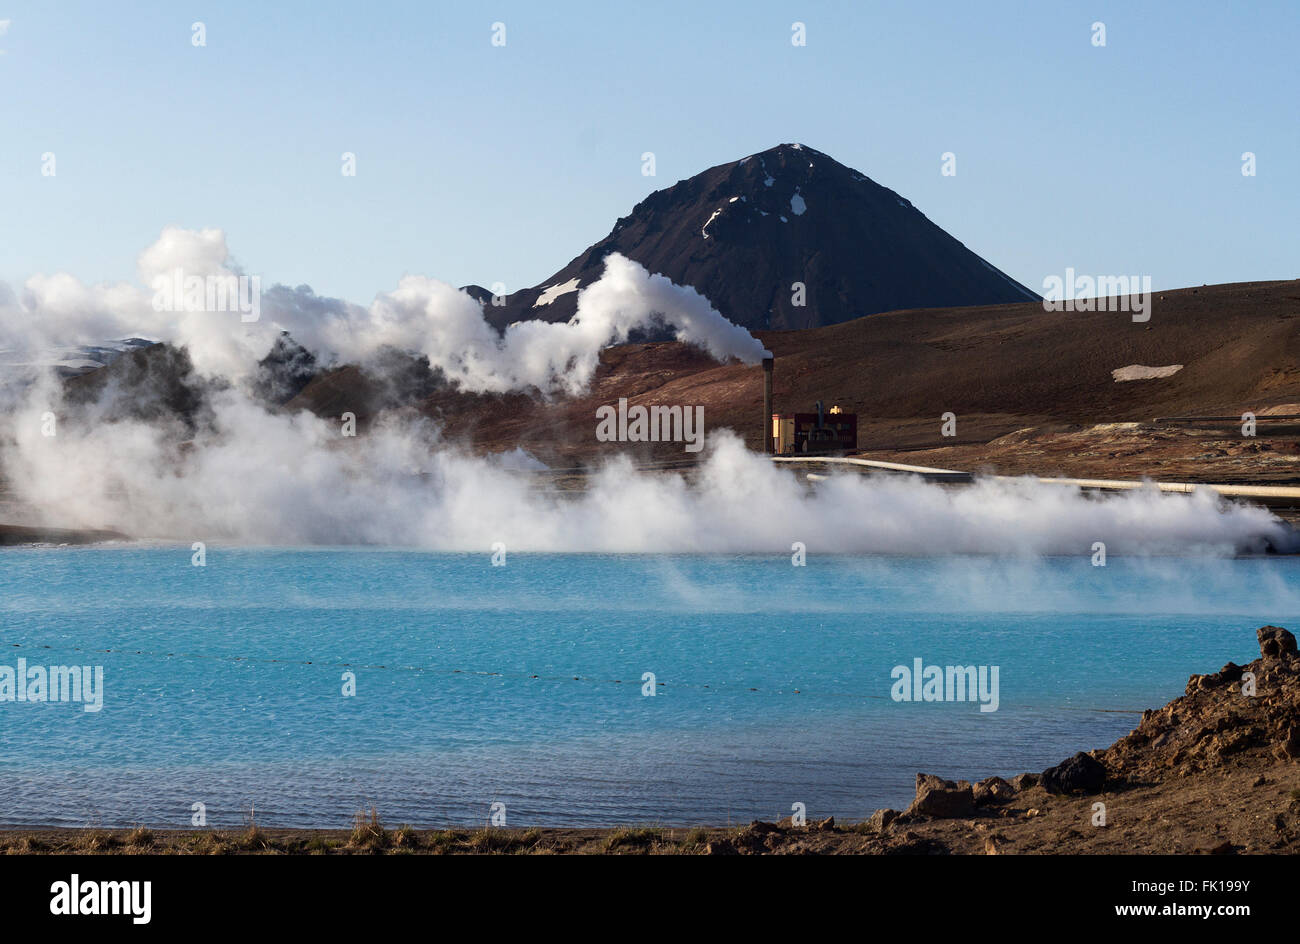 Horizontal view of an Icelandic geothermal power facility near a hot spring and tall mountains in the background Stock Photo